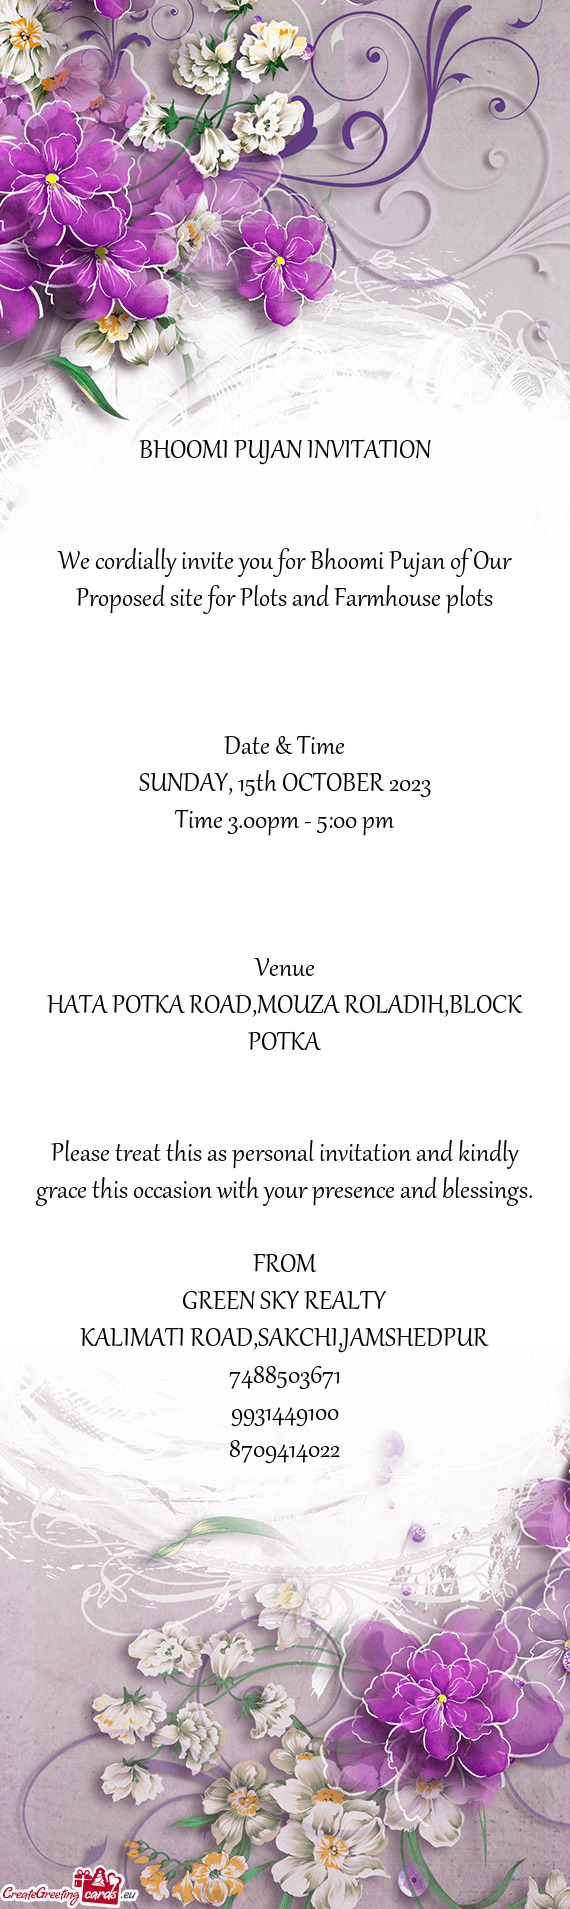 We cordially invite you for Bhoomi Pujan of Our Proposed site for Plots and Farmhouse plots